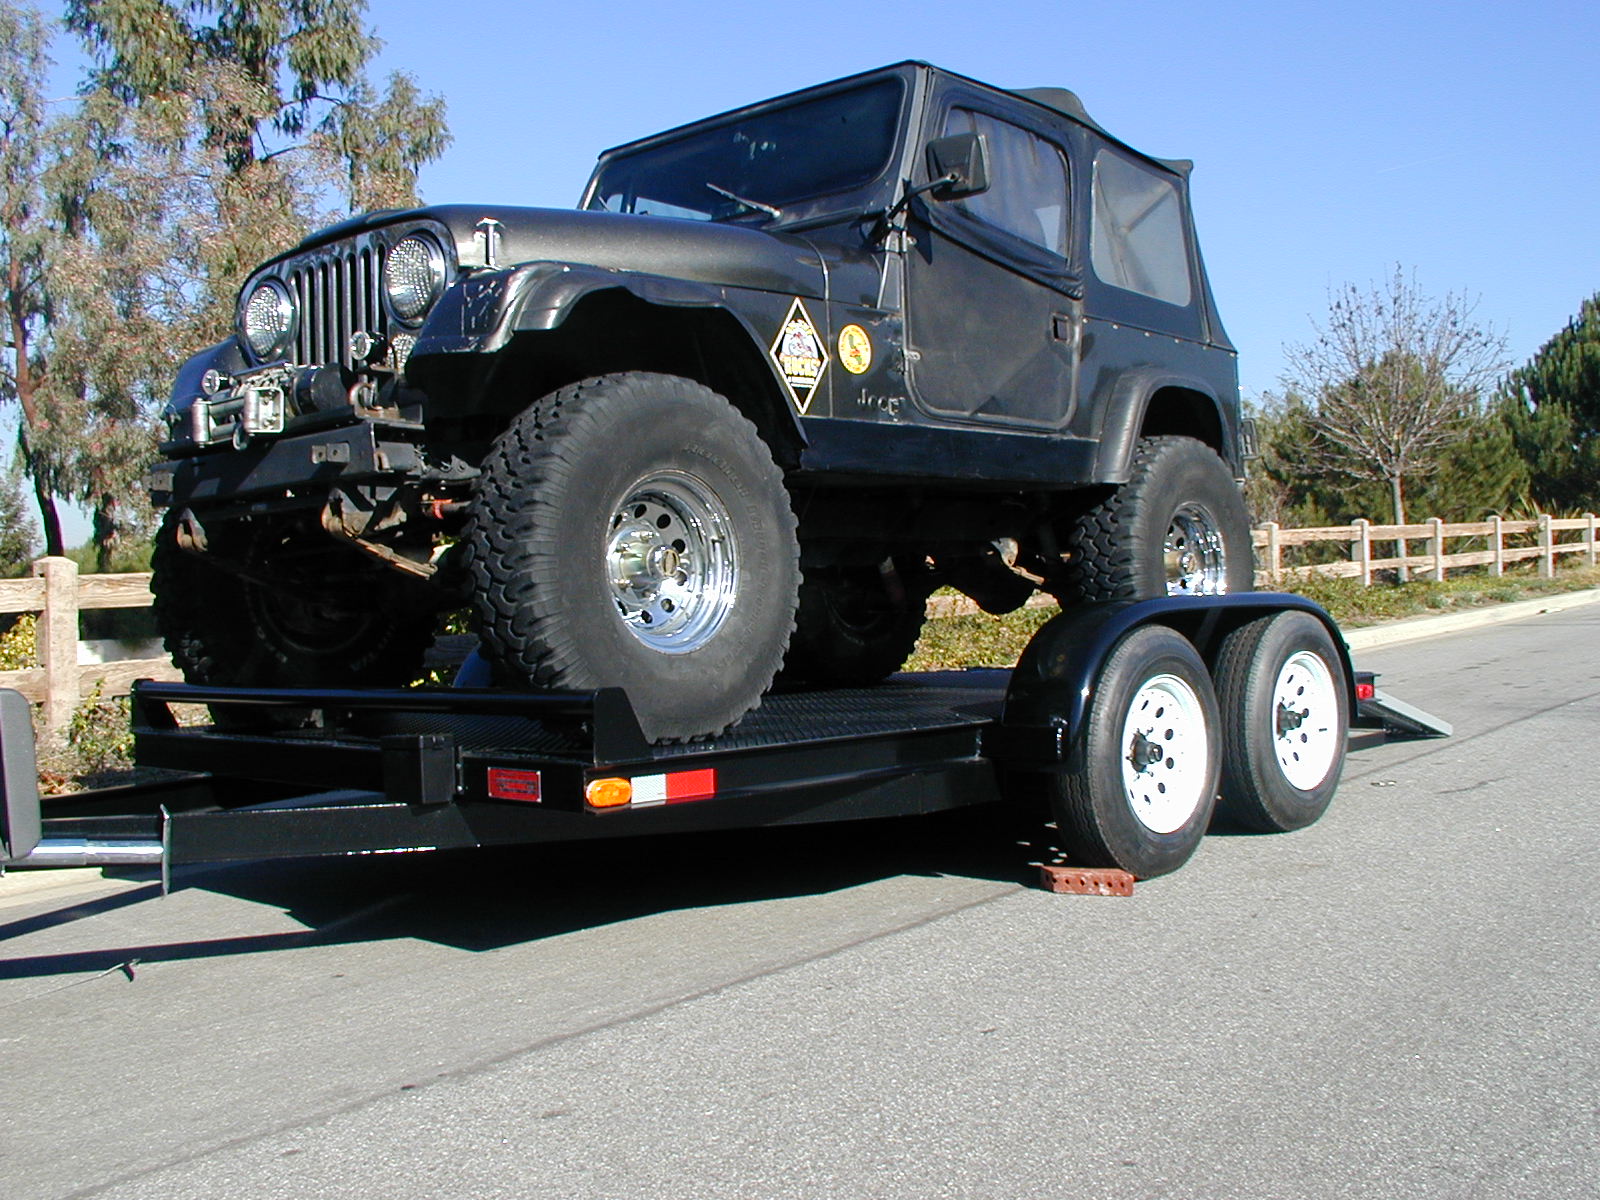 Car Hauler/Trailer – what to look for/avoid - MJR